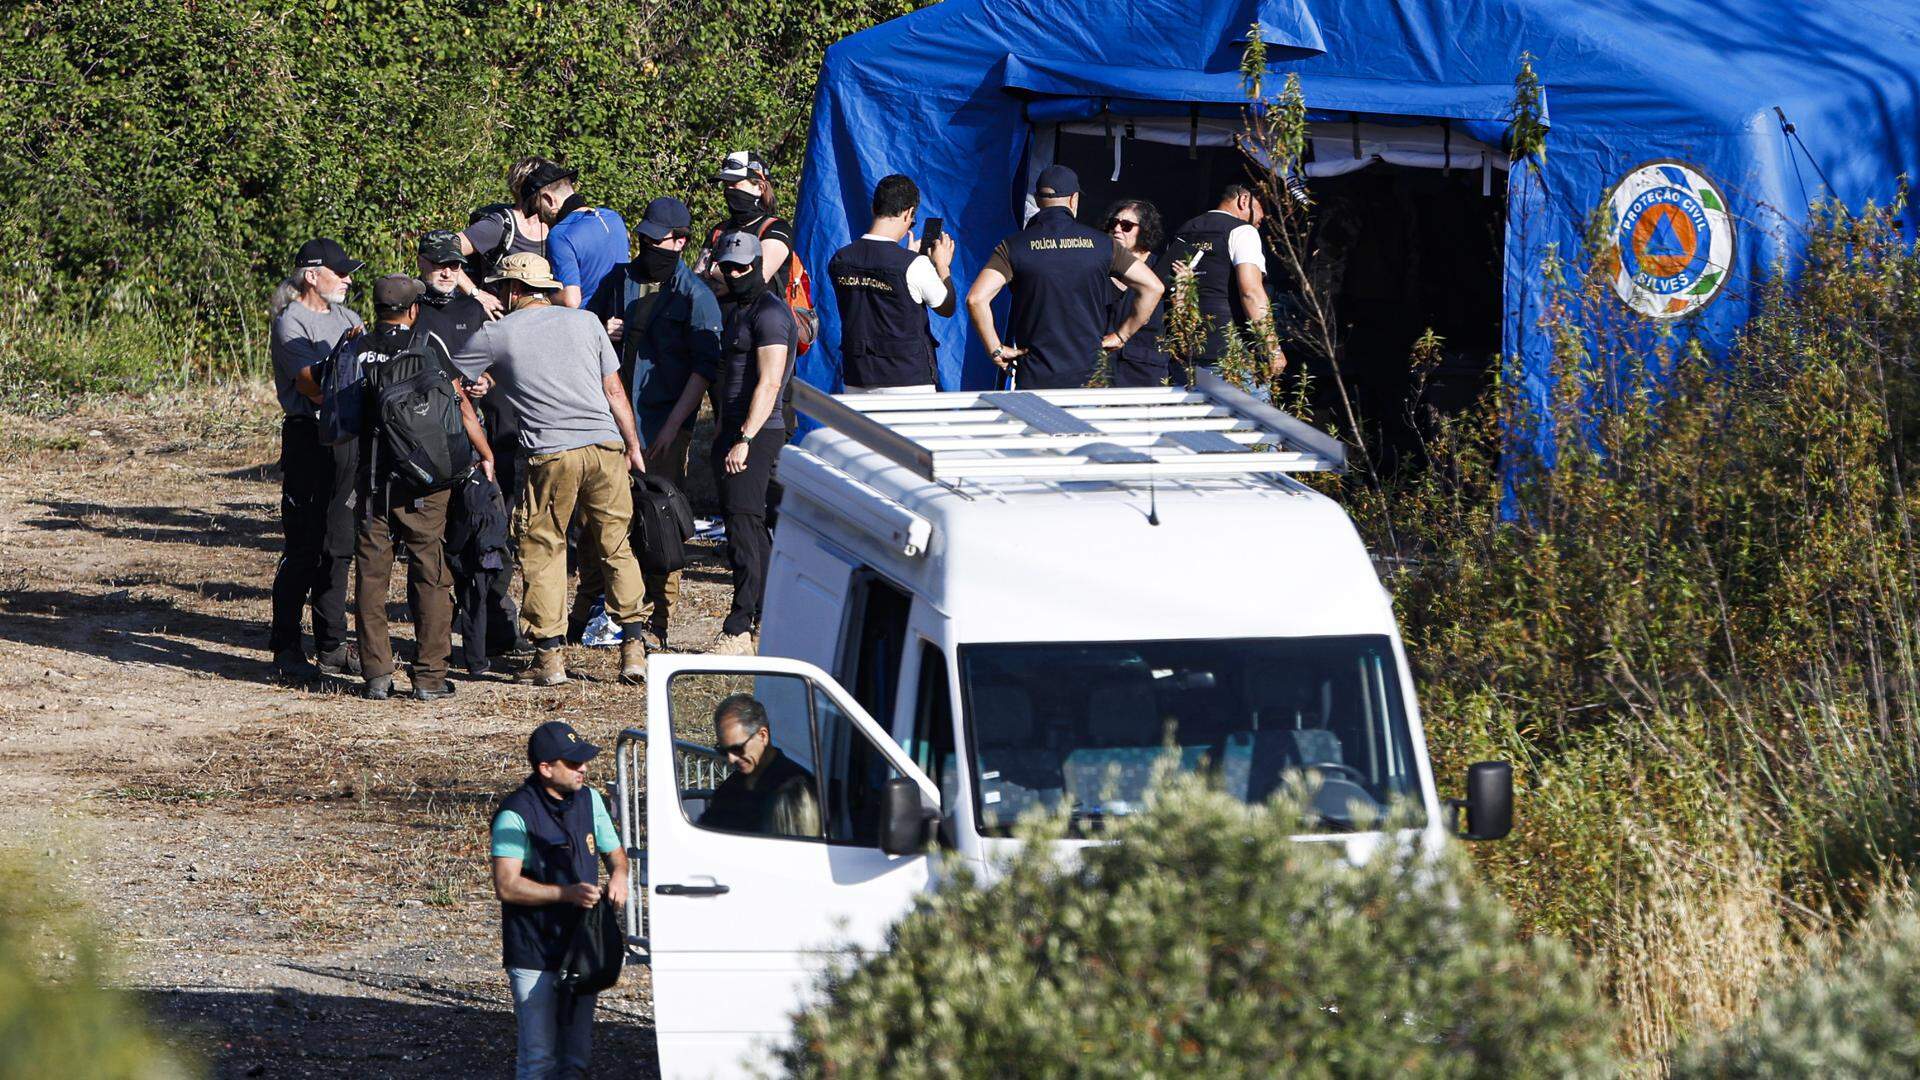 epa10652116 Authorities gather at a Judiciary Police (PJ) makeshift base camp in the Arade dam area, Faro district, during the new search operation amid the investigation into the disappearance of Madeleine McCann, in Silves, Portugal, 25 May 2023. The operation, which began on 23 May, stems from a European Investigation Order addressed by the German authorities to Portugal and focuses on the Arade dam, located about 50 kilometers from Praia da Luz, where the child disappeared on 03 May 2007 while on vacation with her parents.  EPA/LUIS FORRA